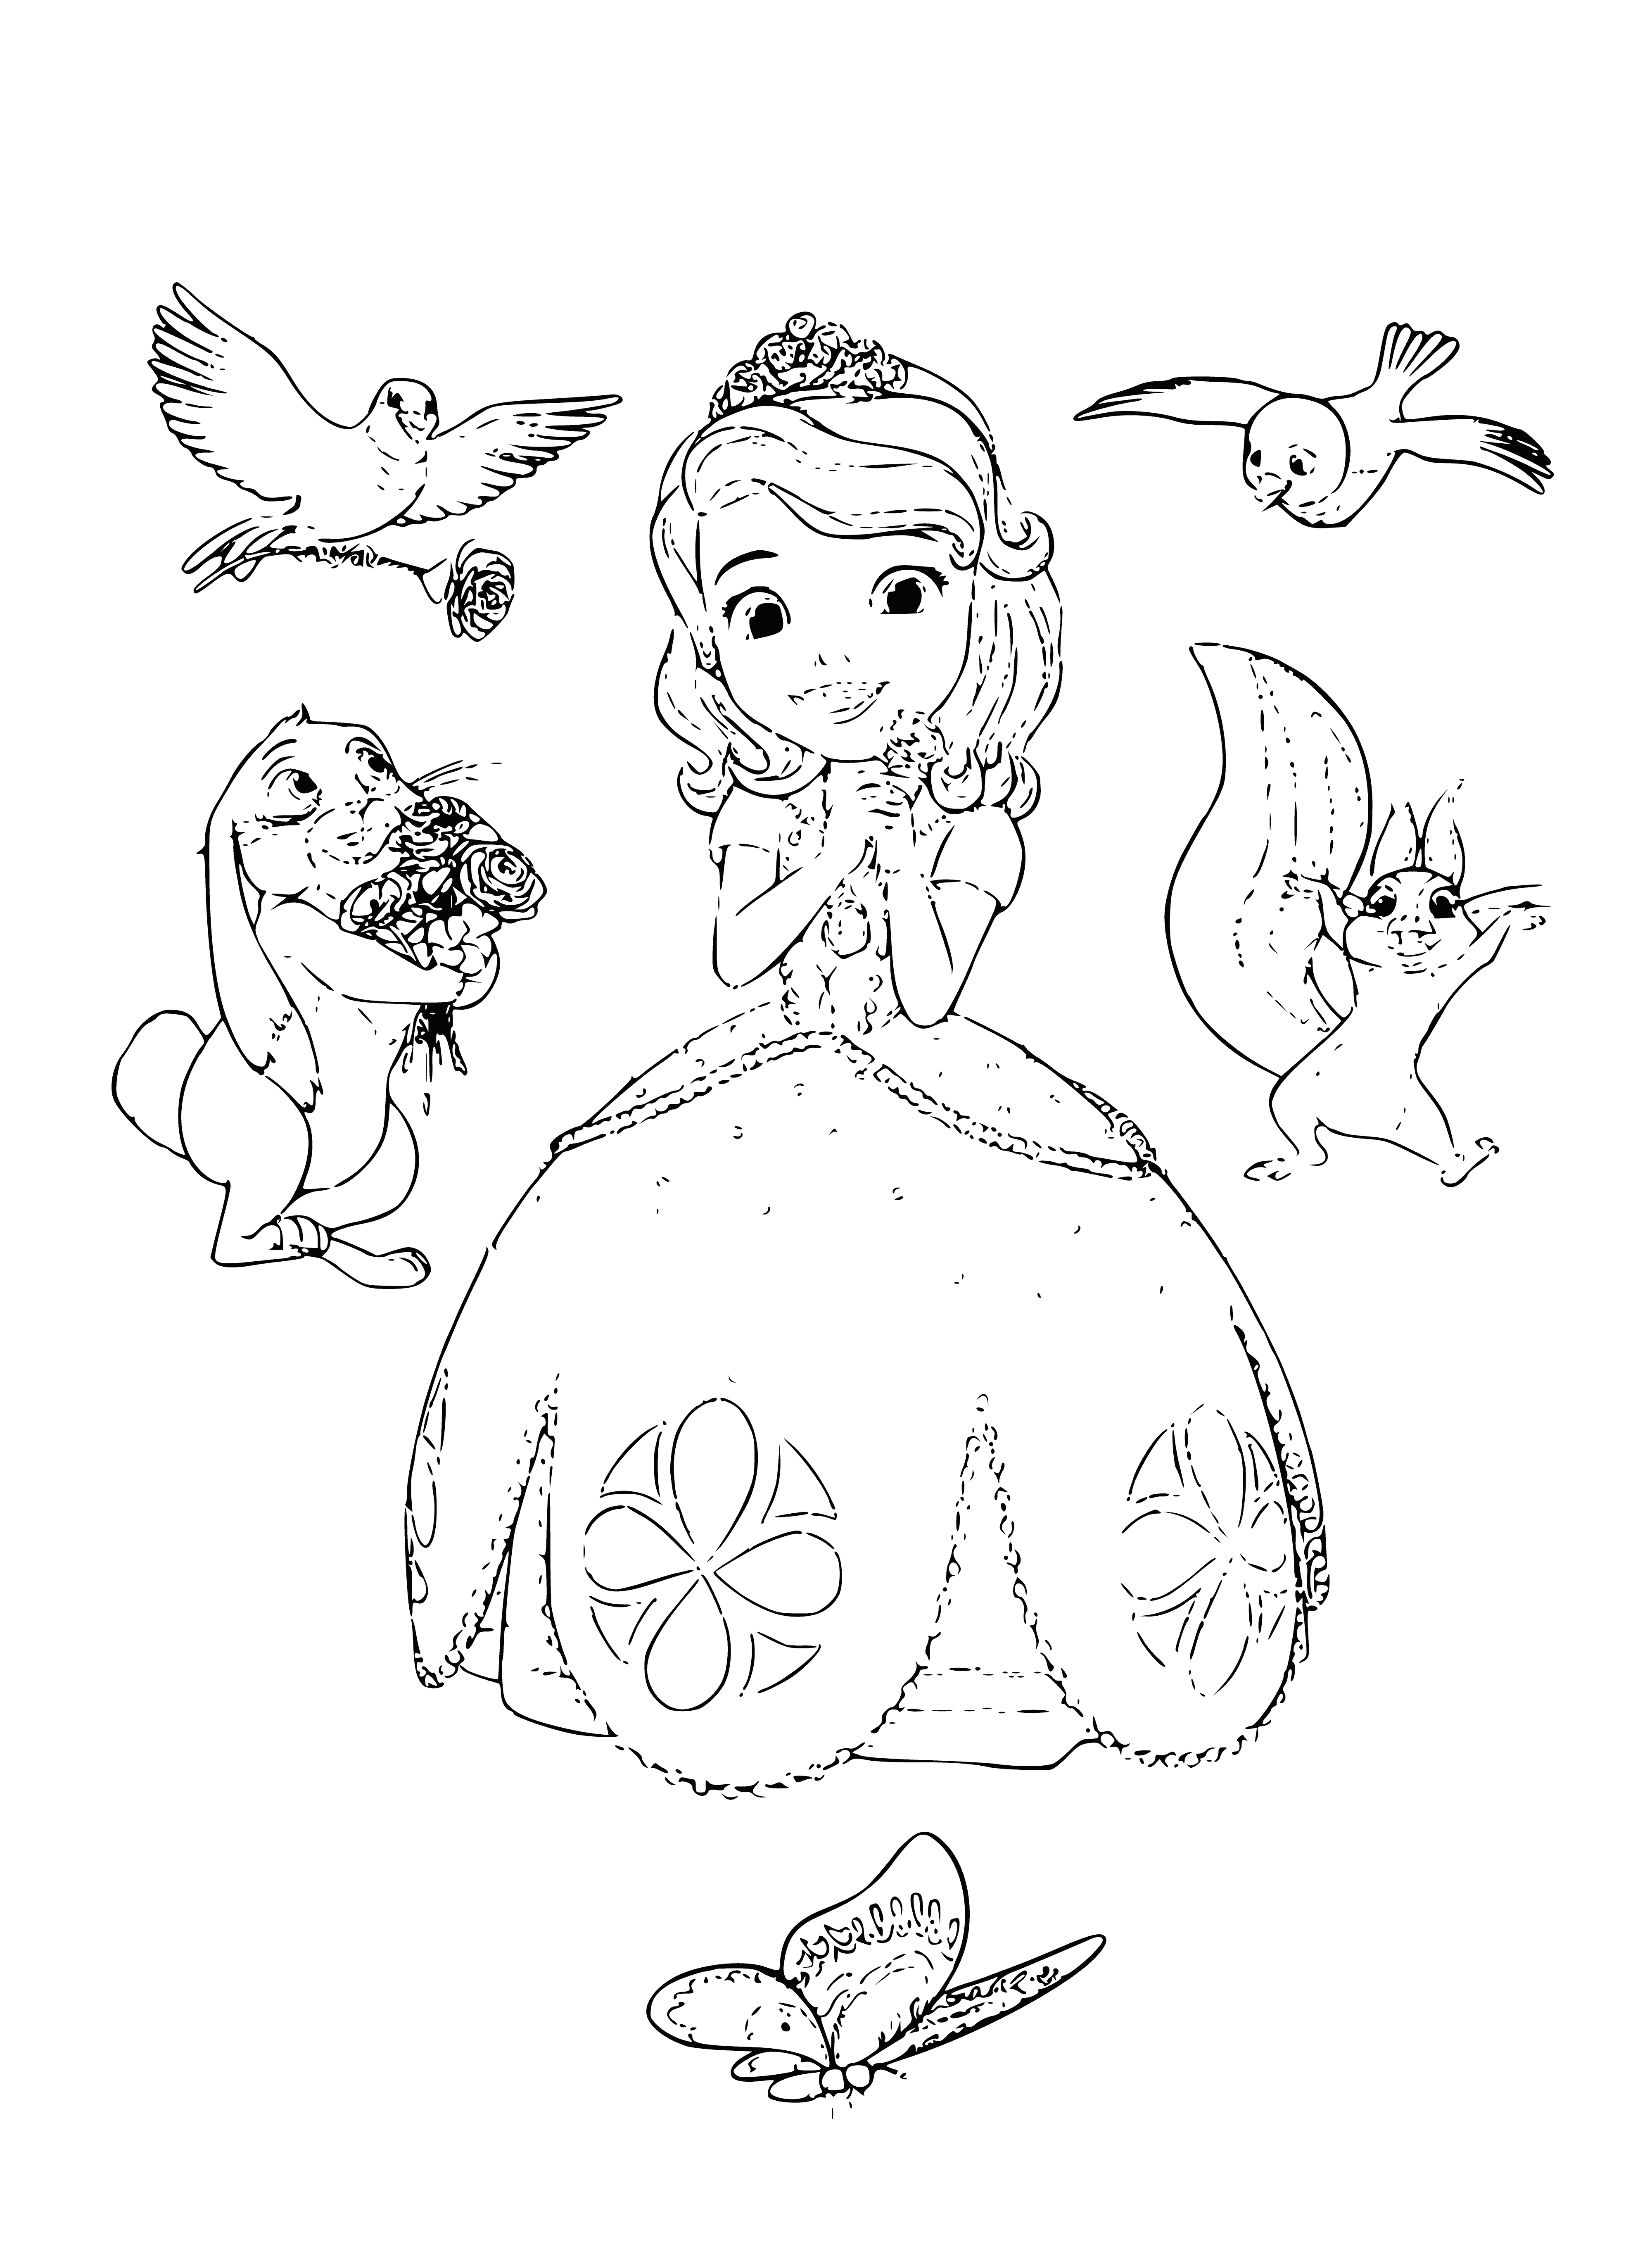 coloring page: Sofia smiles, cuddling a baby bunny in her arms, as three squirrels and a chipmunk play around her feet. A bluebird sits on her shoulder.